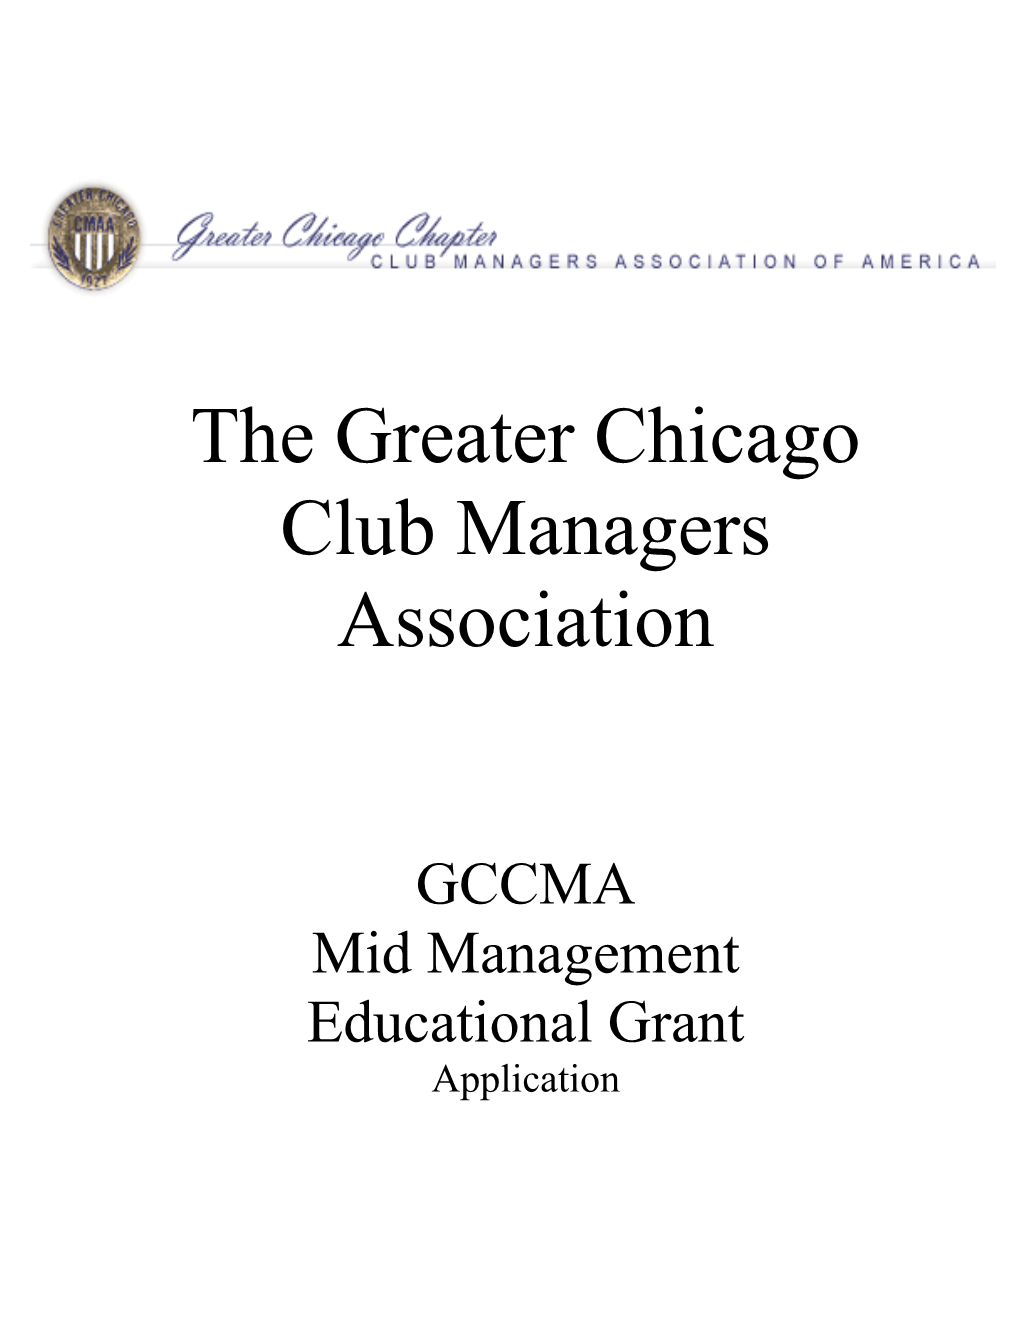 The Greater Chicago Club Managers Association